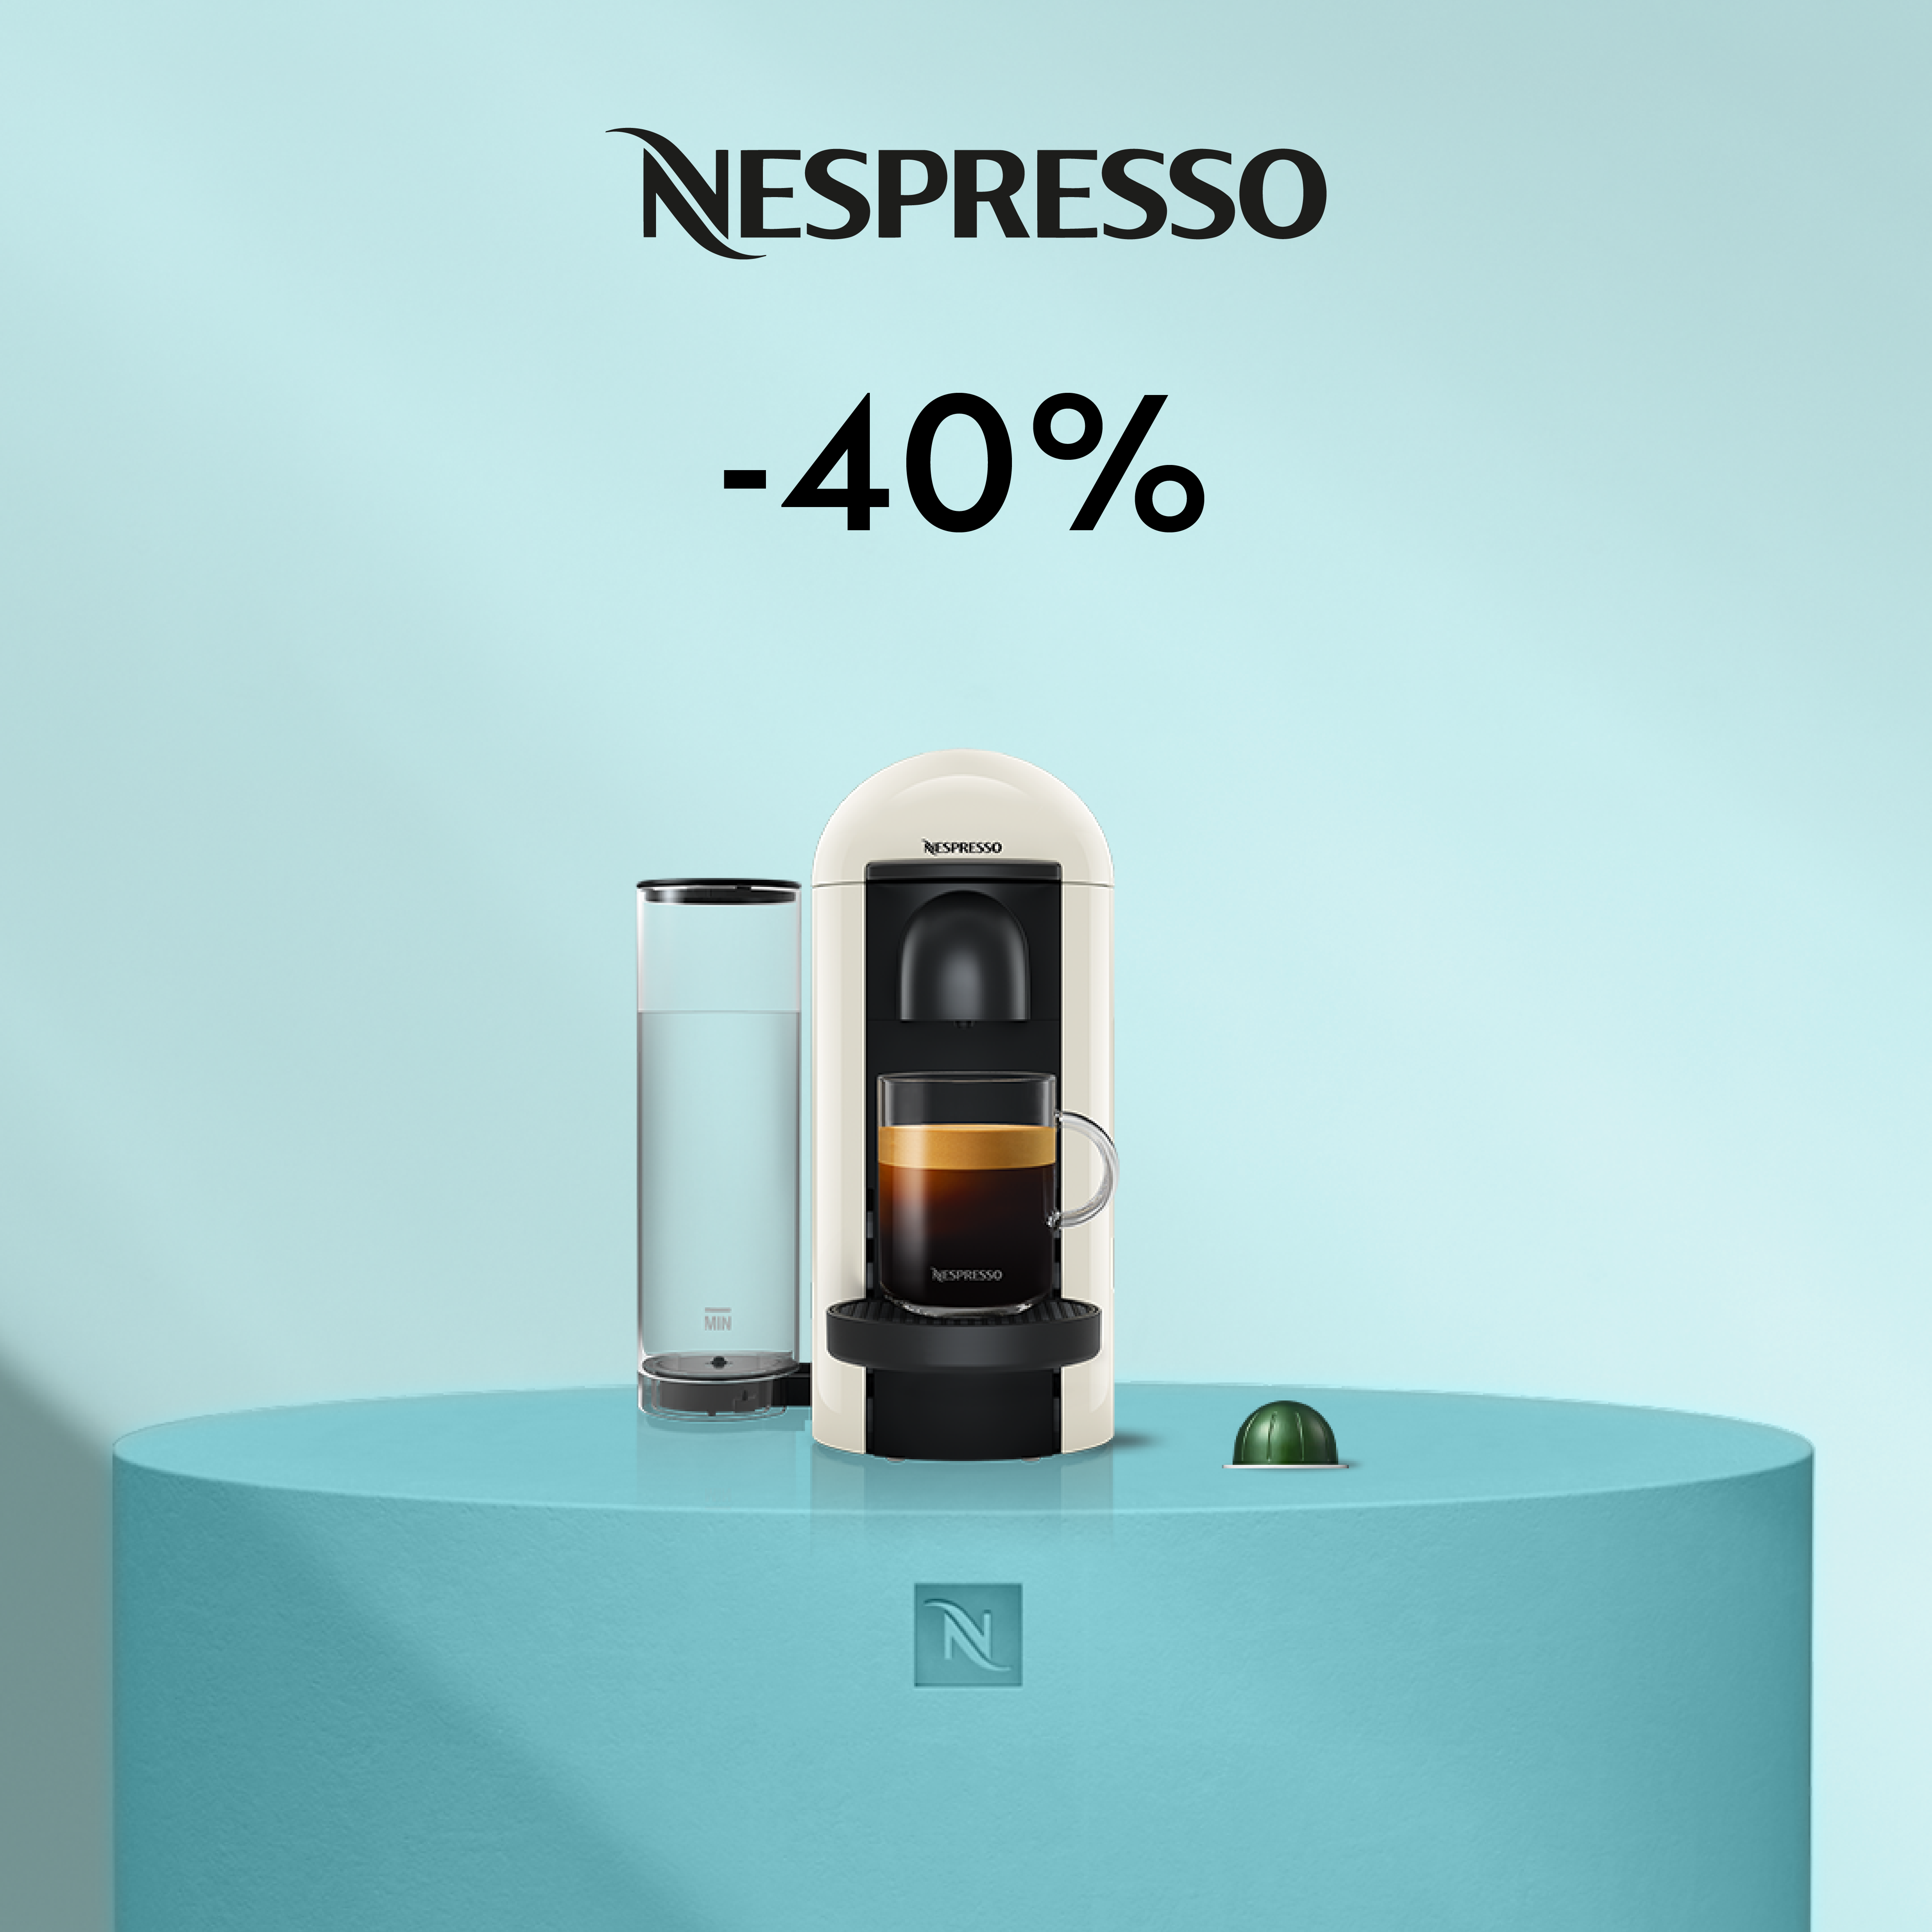 40% DISCOUNT ON THE VERTUO PLUS COFFEE MACHINE WHEN YOU BUY 80 CAPSULES!